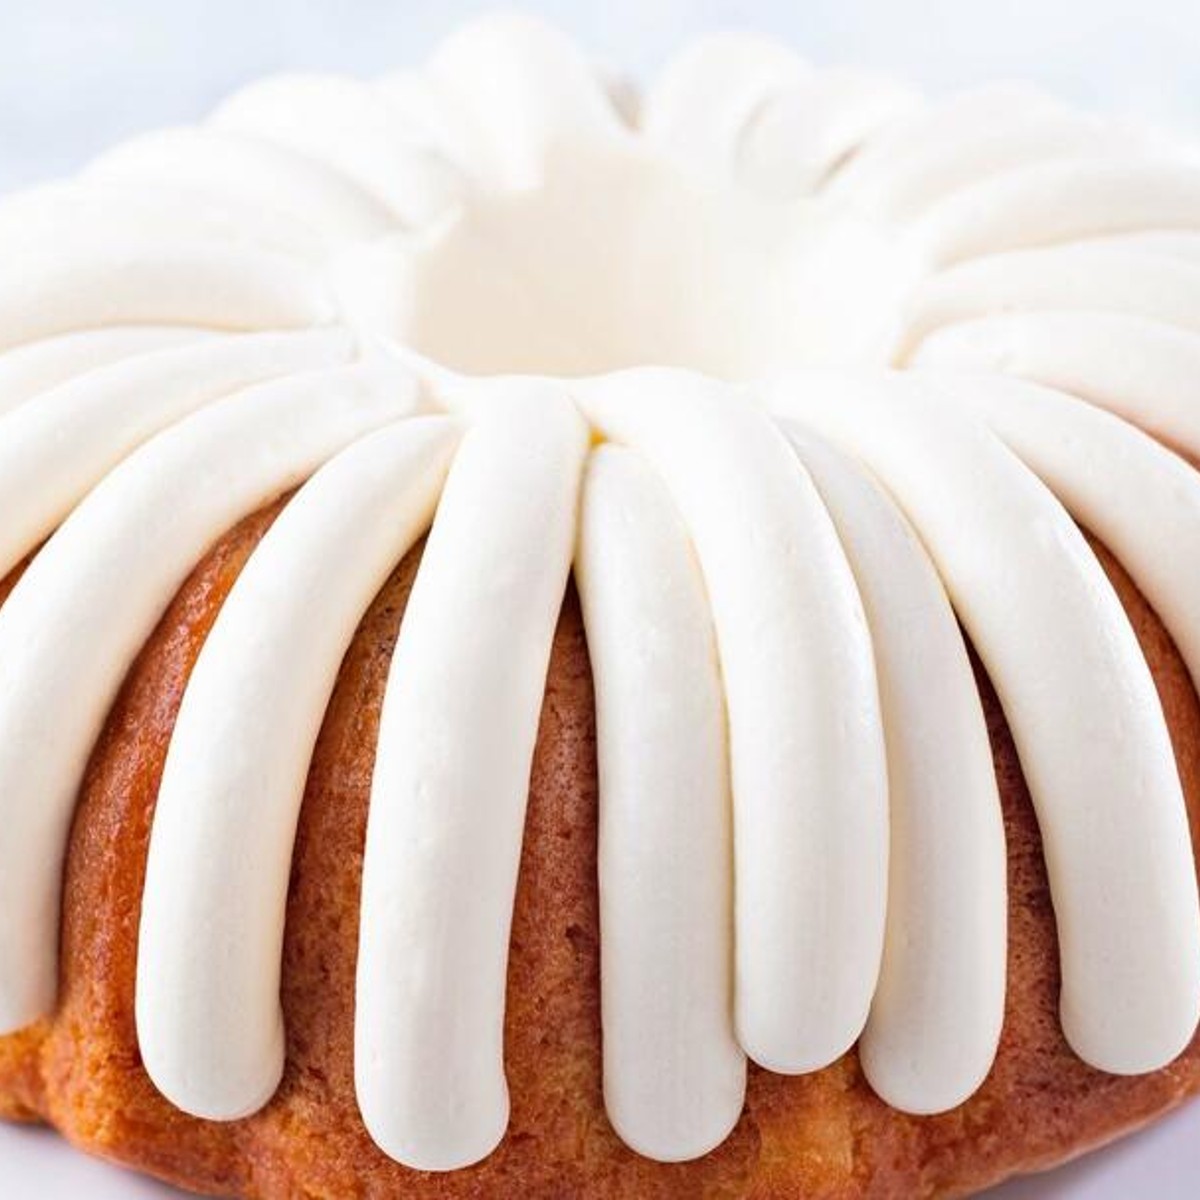 Nothing Bundt Cakes Brings More than Just Bundt Cakes to West